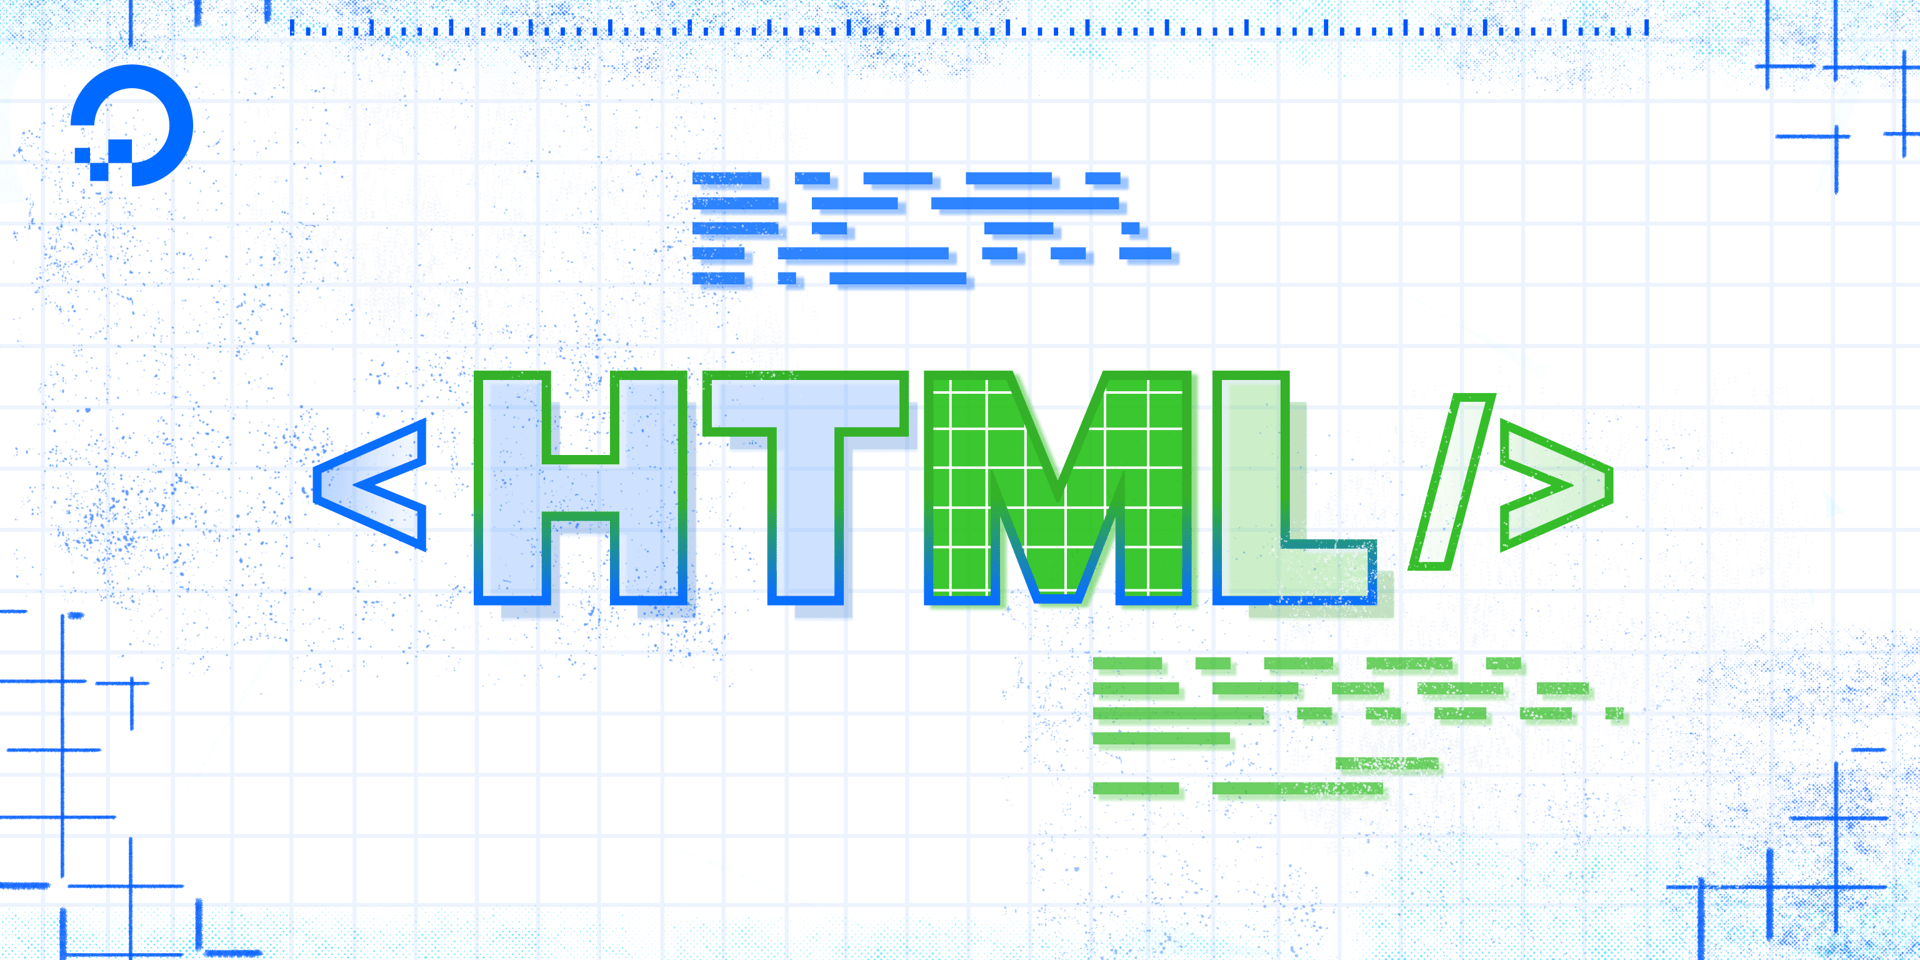 How To Change the Color of HTML Elements